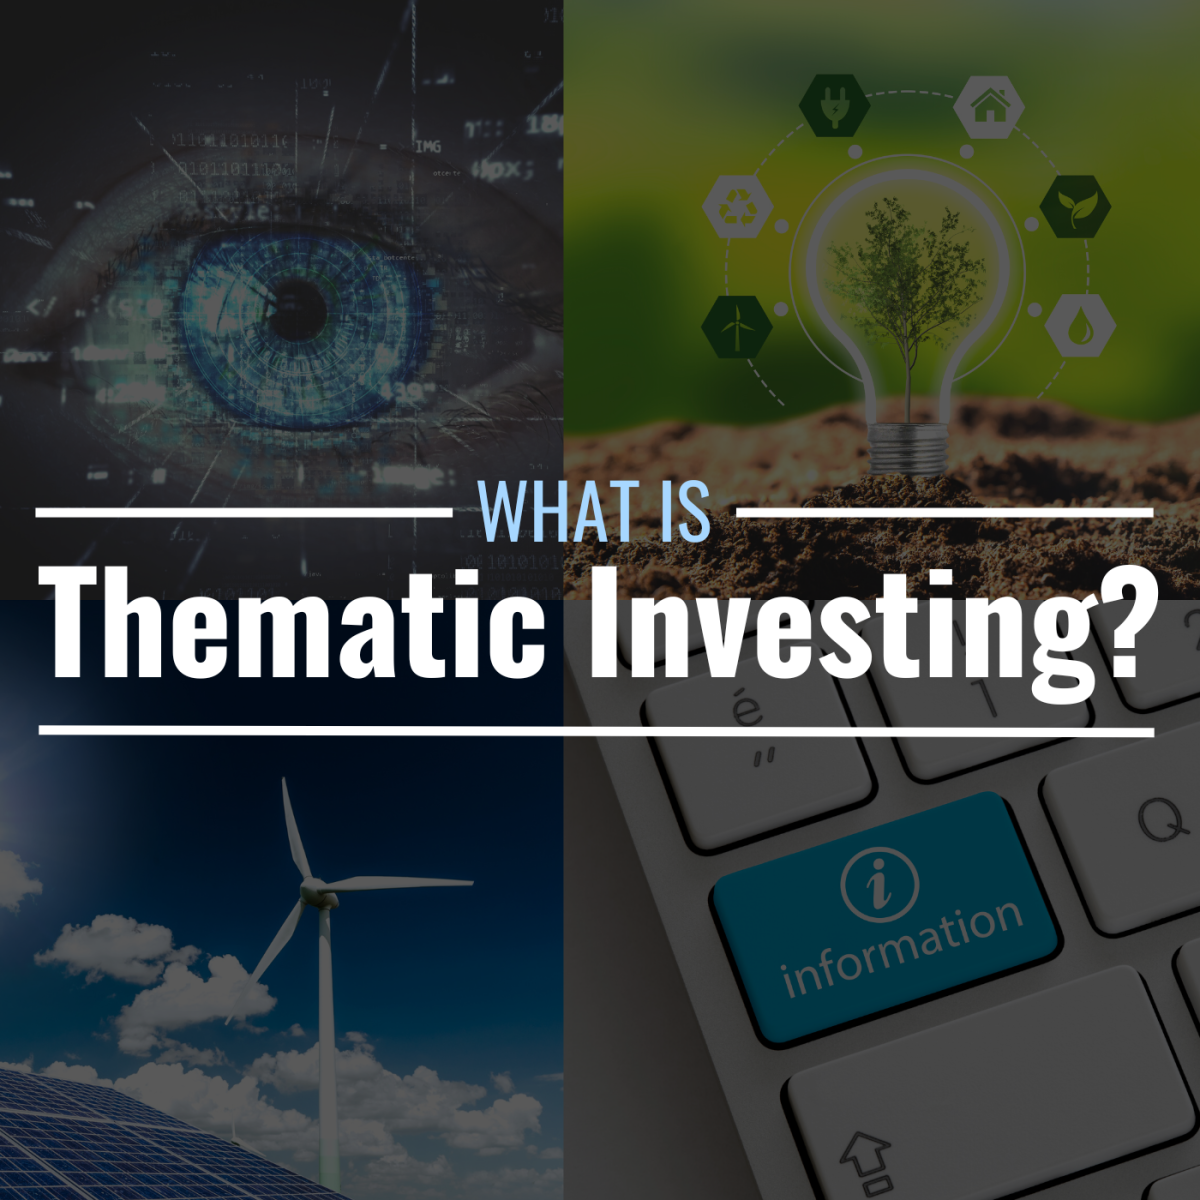 Photo collage with text overlay that reads "What Is Thematic Investing?"